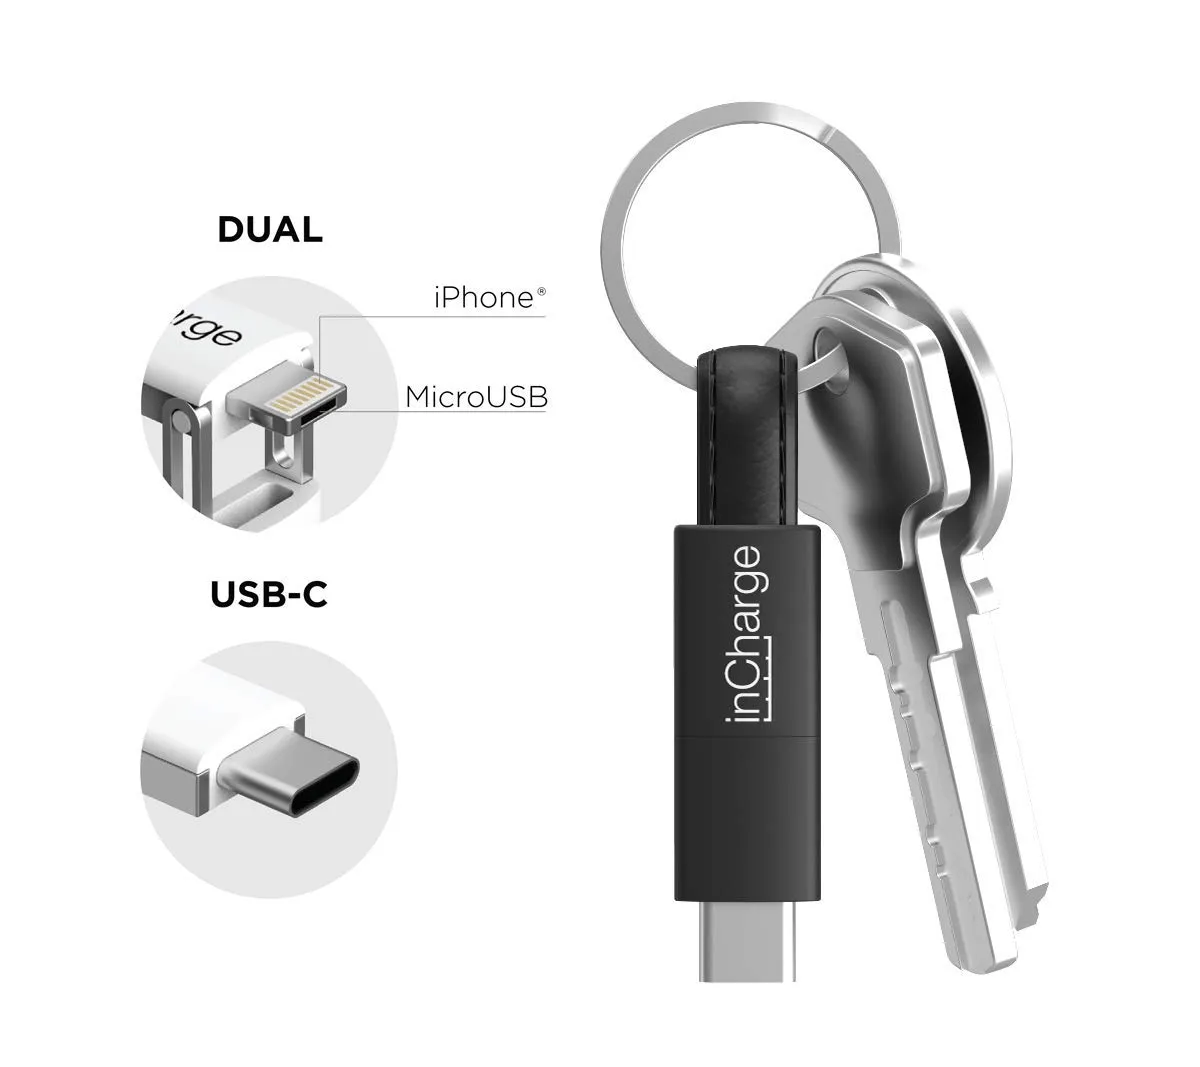 The tech 3-in-1 keyring is a useful